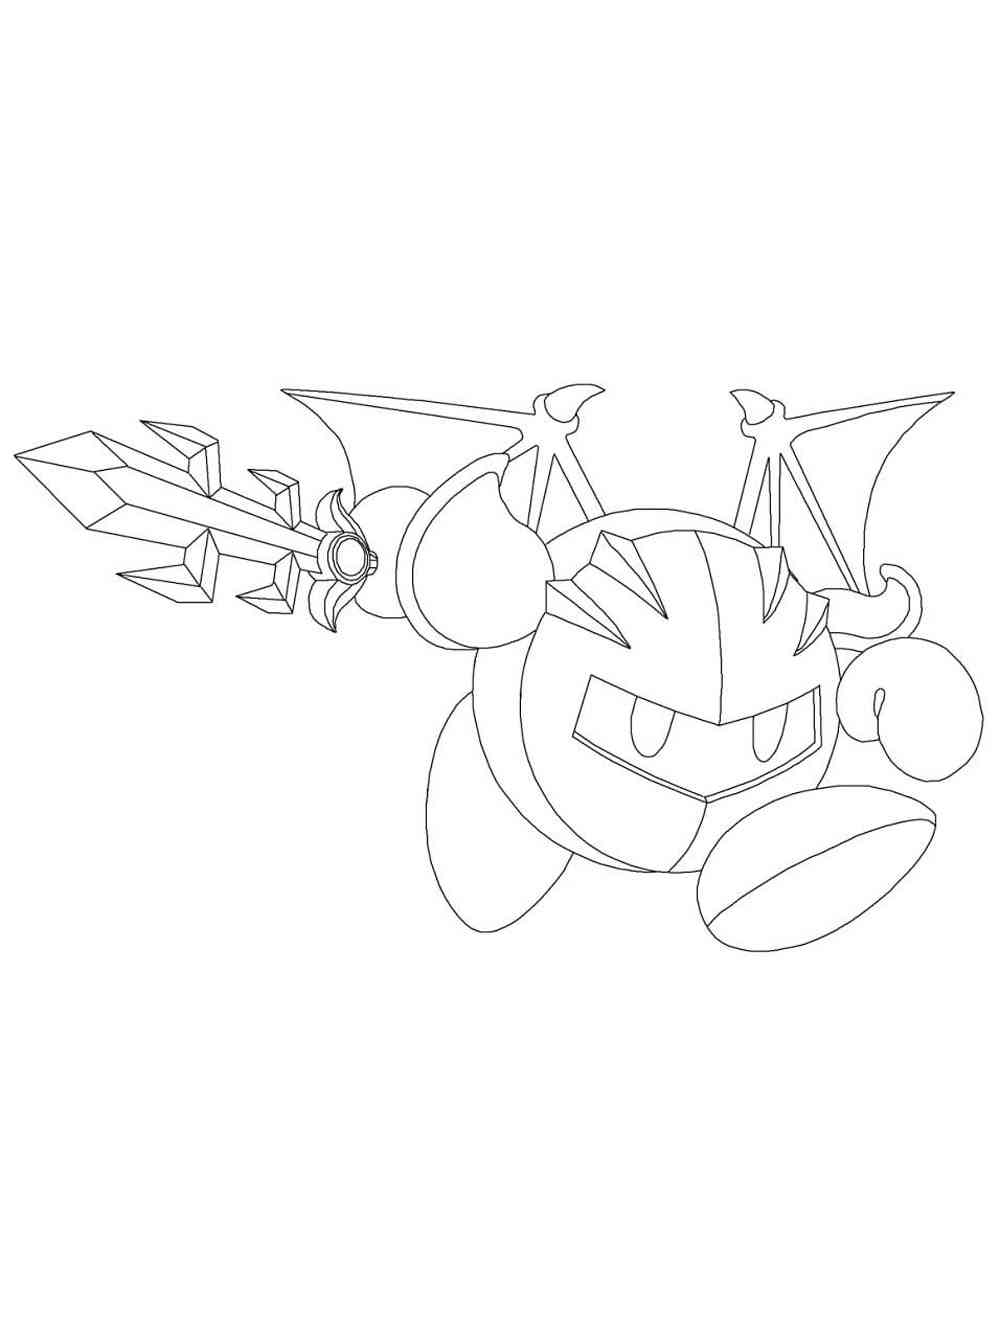 Meta Knight 5 coloring page